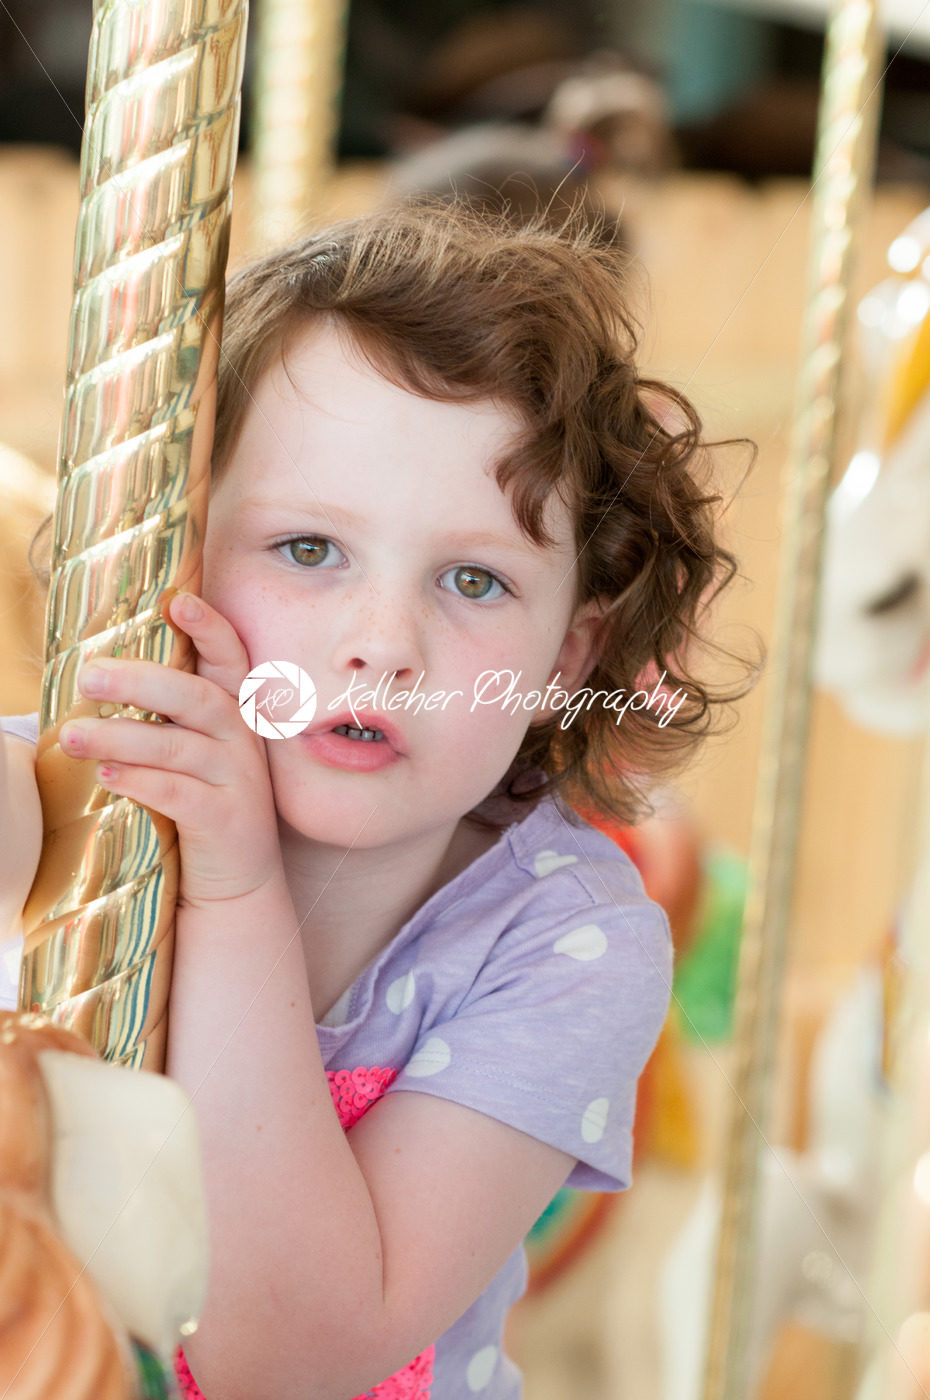 Young girl riding on fairground horse on carousel amusement ride at fairgrounds park outdoor - Kelleher Photography Store